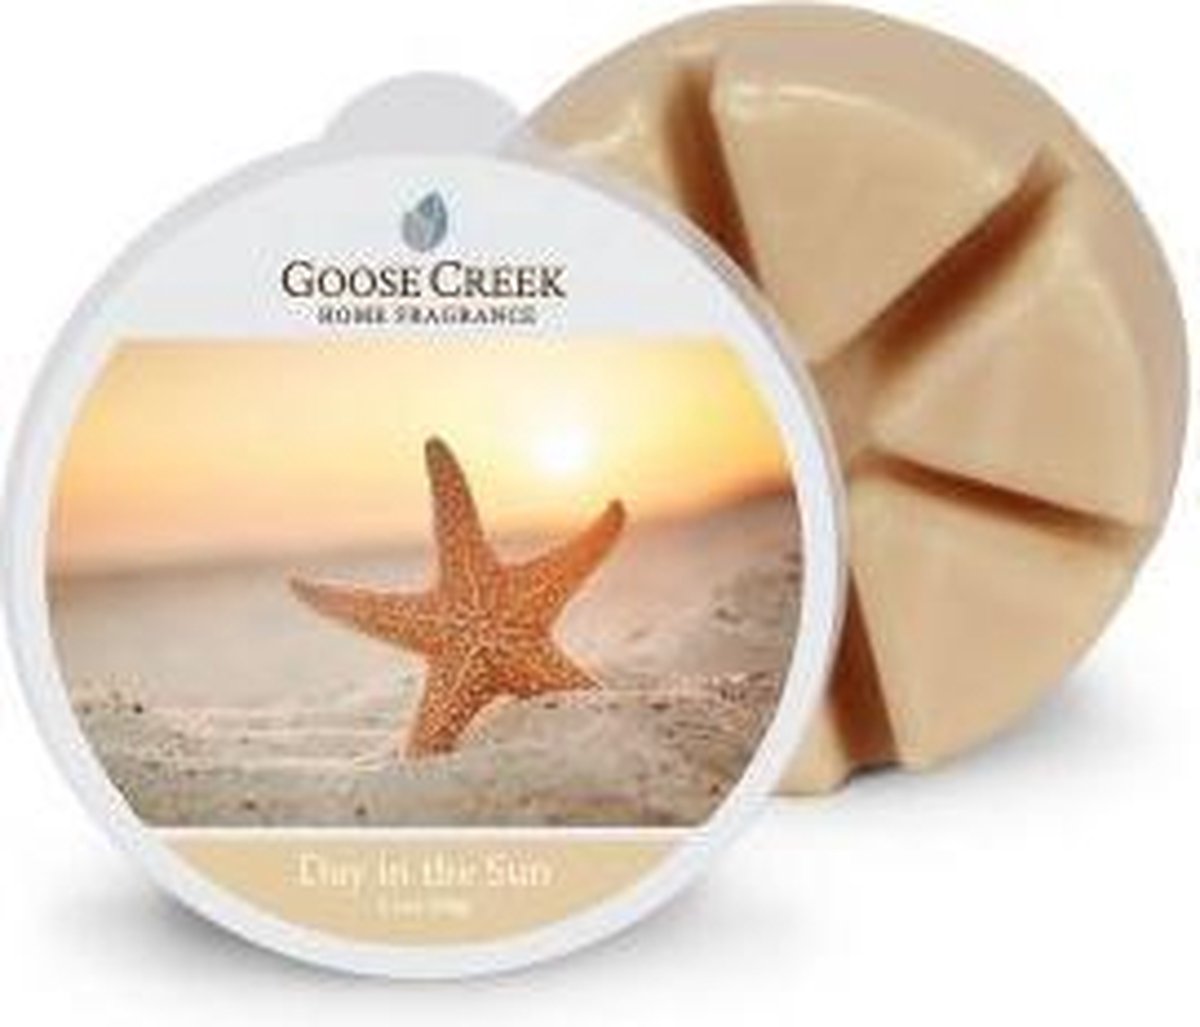 Goose Creek Wax Melts Day In The Sun